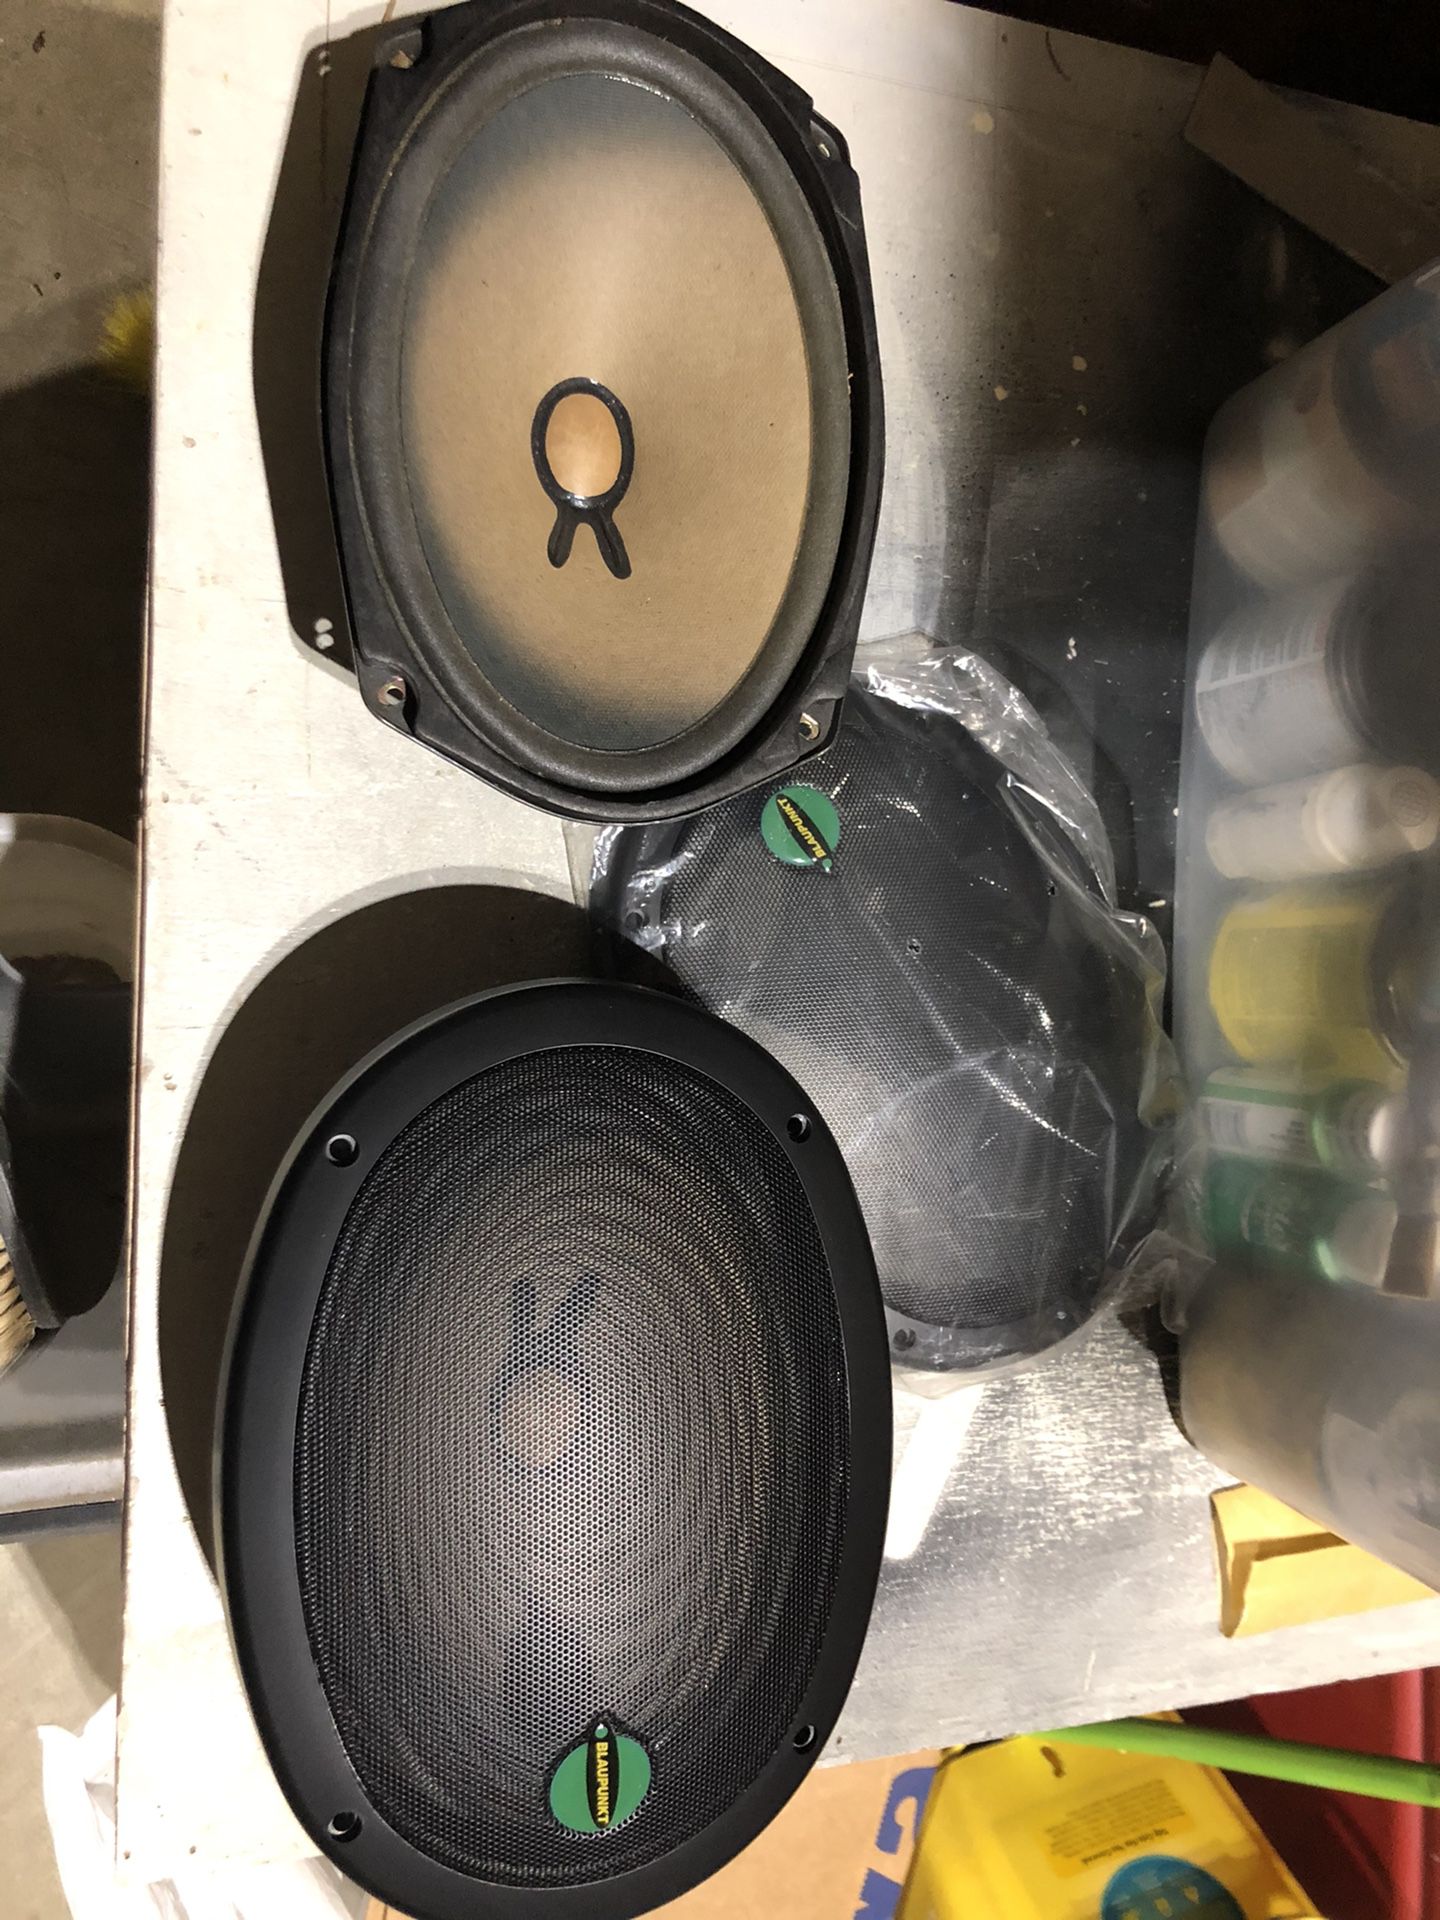 FREE-6x9 Speakers, W/ Grille